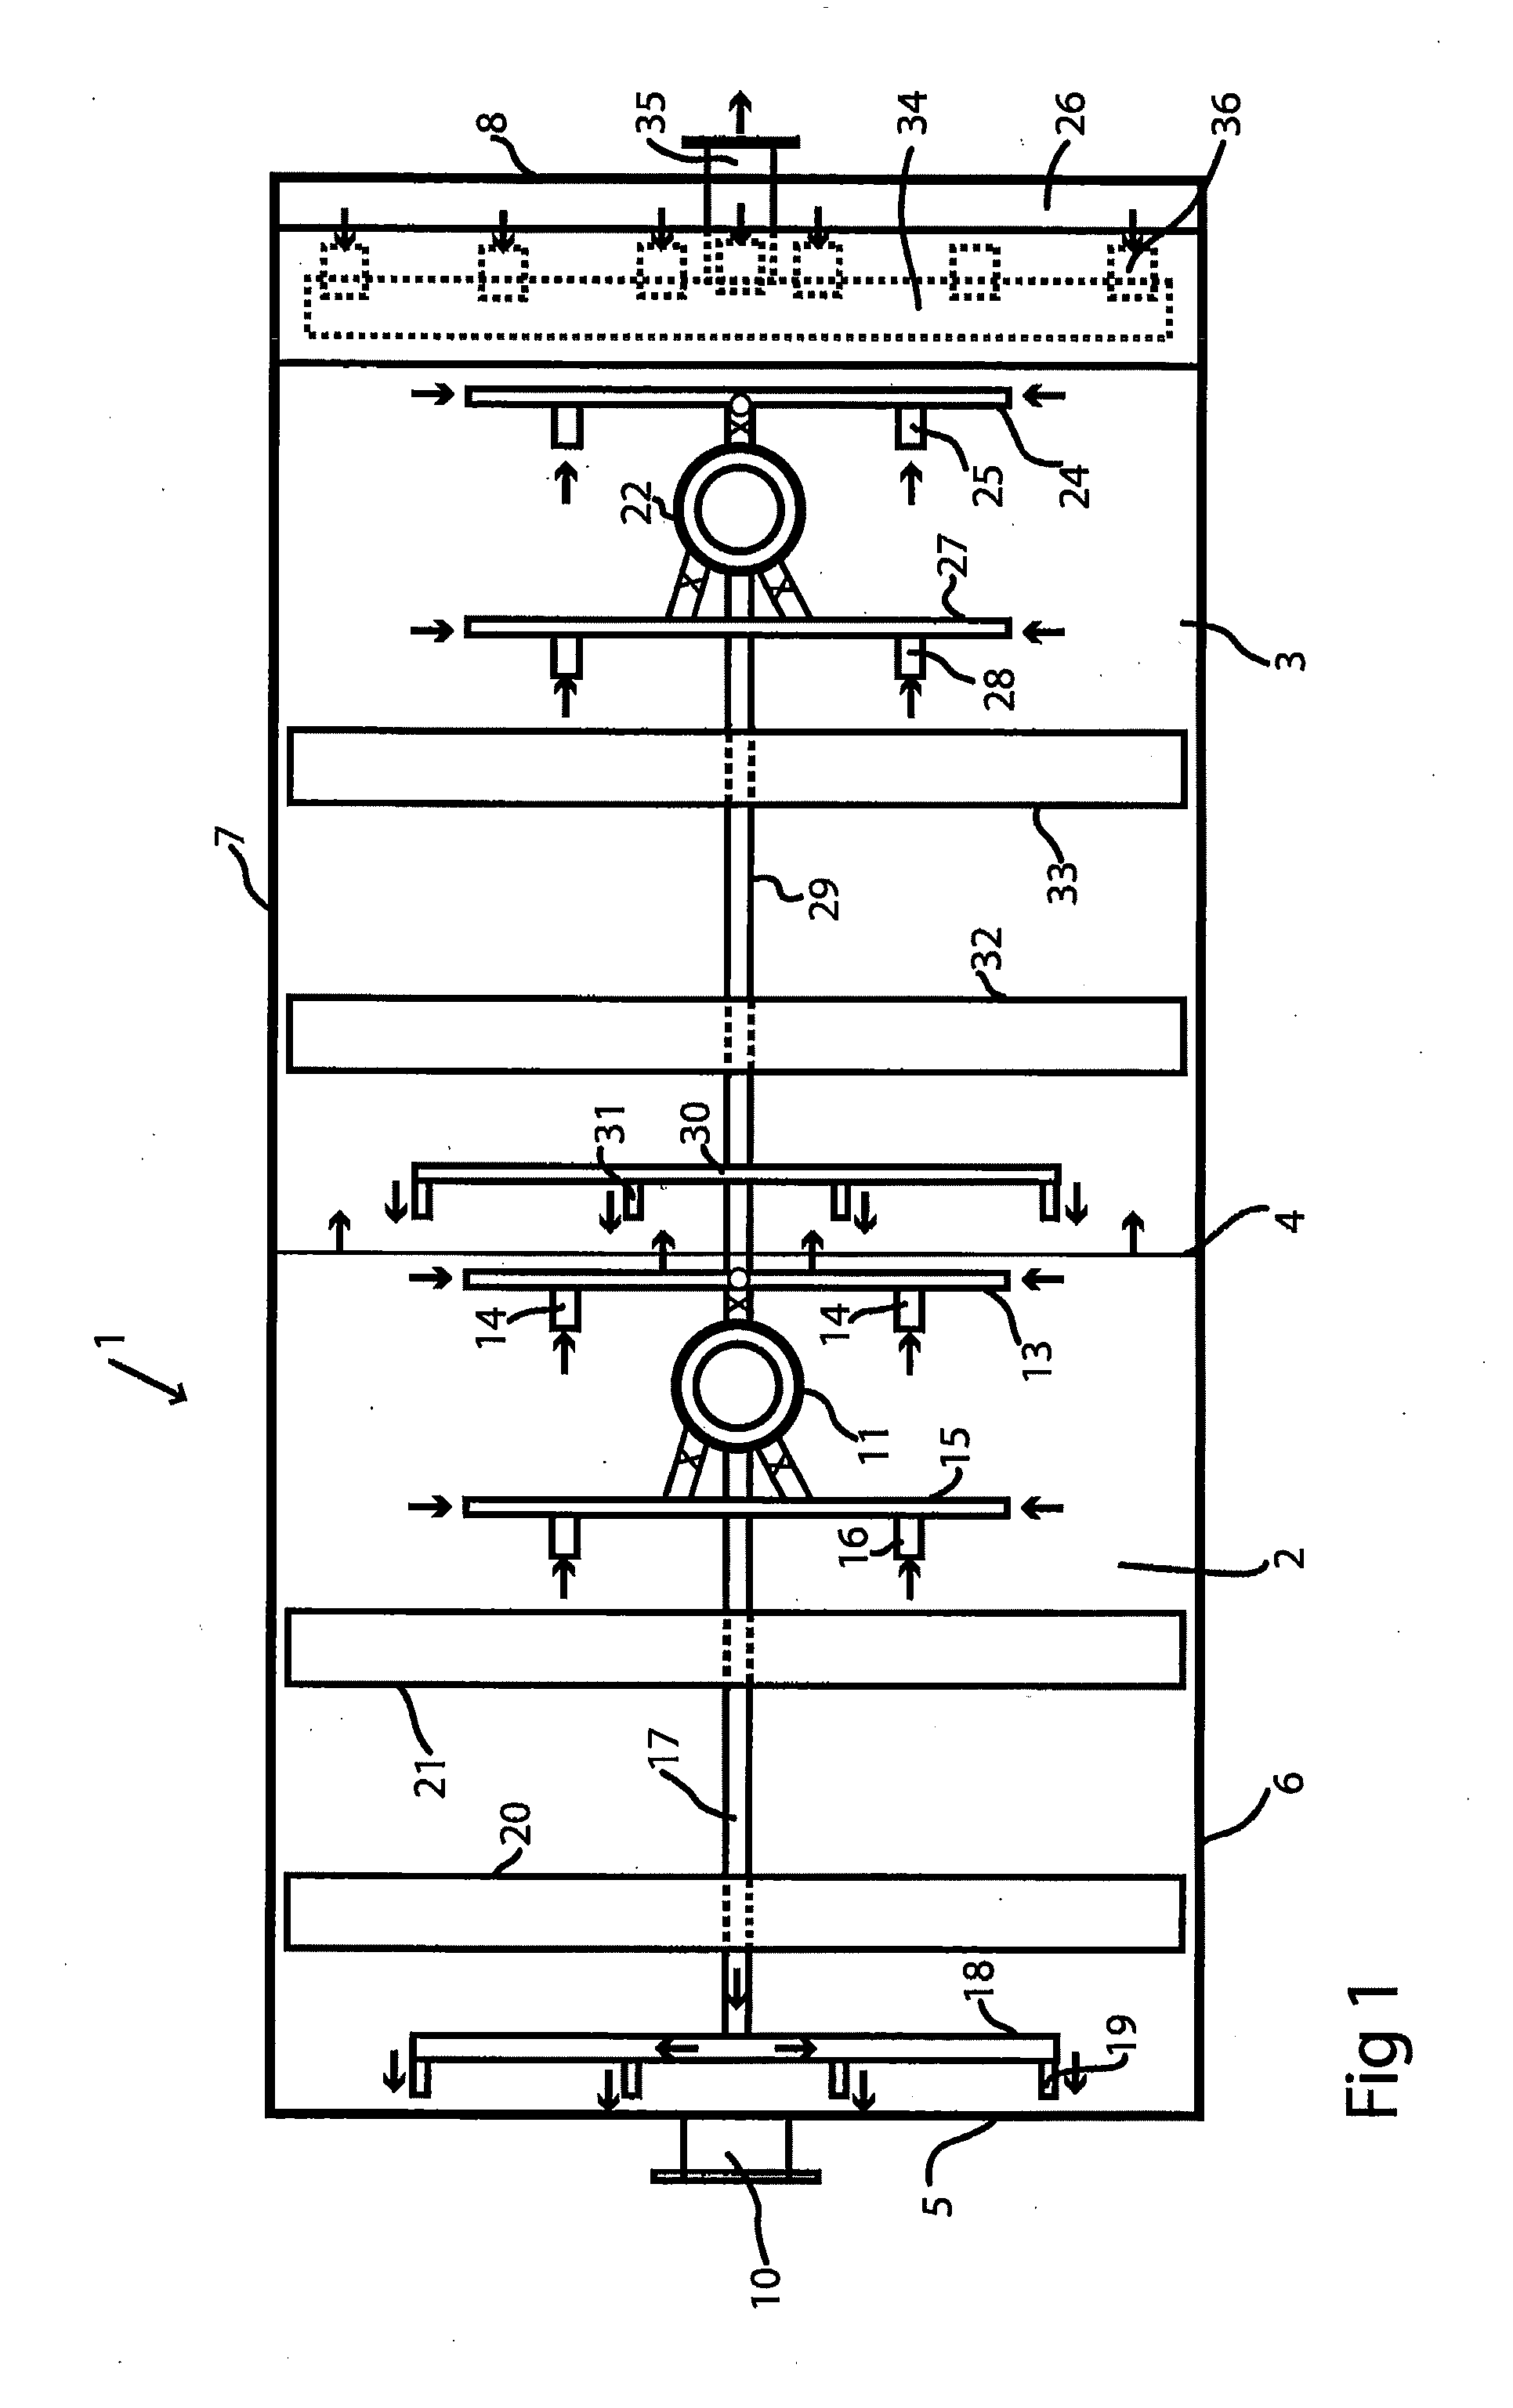 Apparatus and method for removing impurities in connection with liquid-liquid extraction of copper